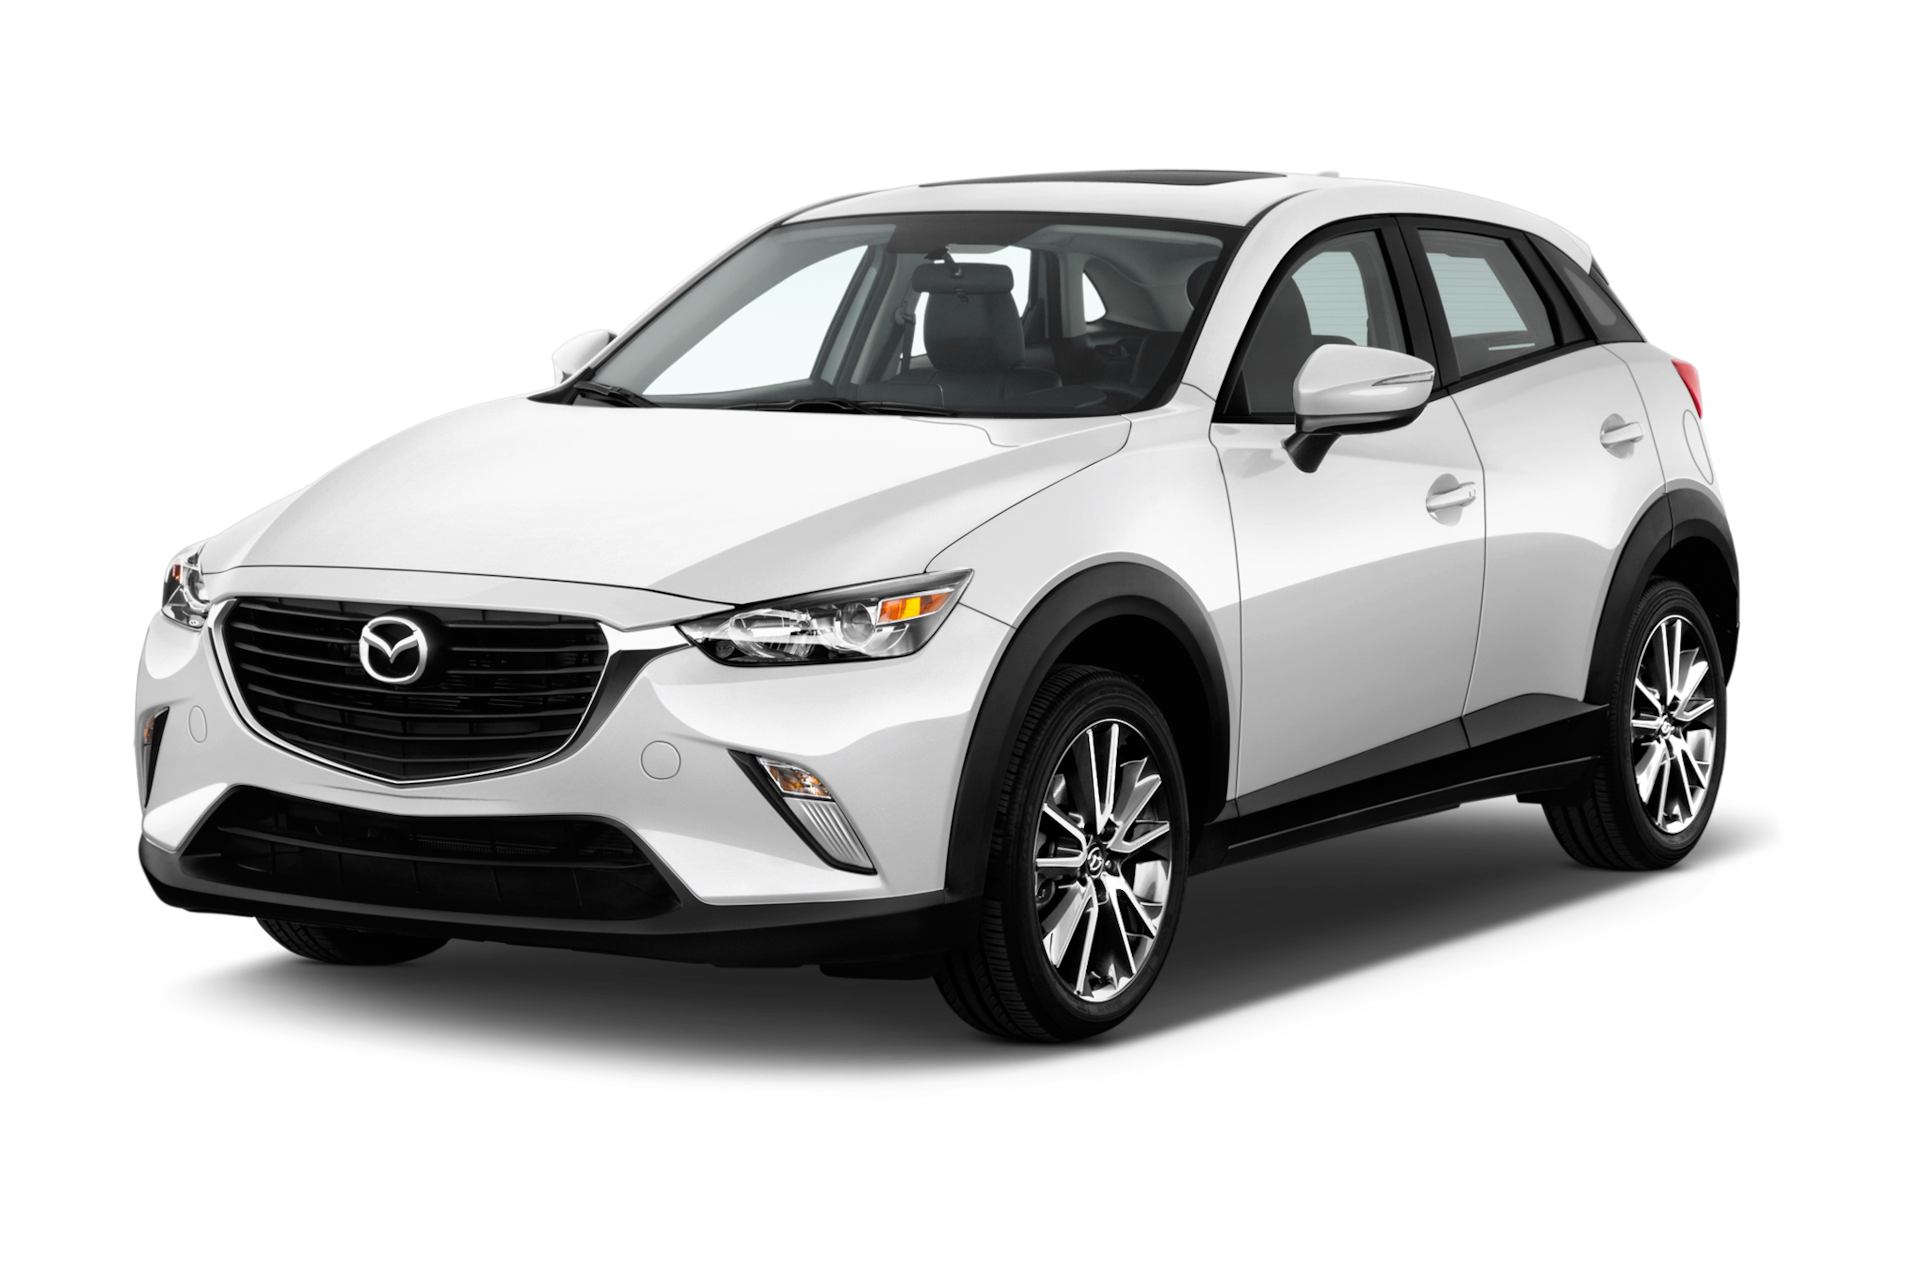 2018 Mazda CX-3 Prices, Reviews, and Photos - MotorTrend